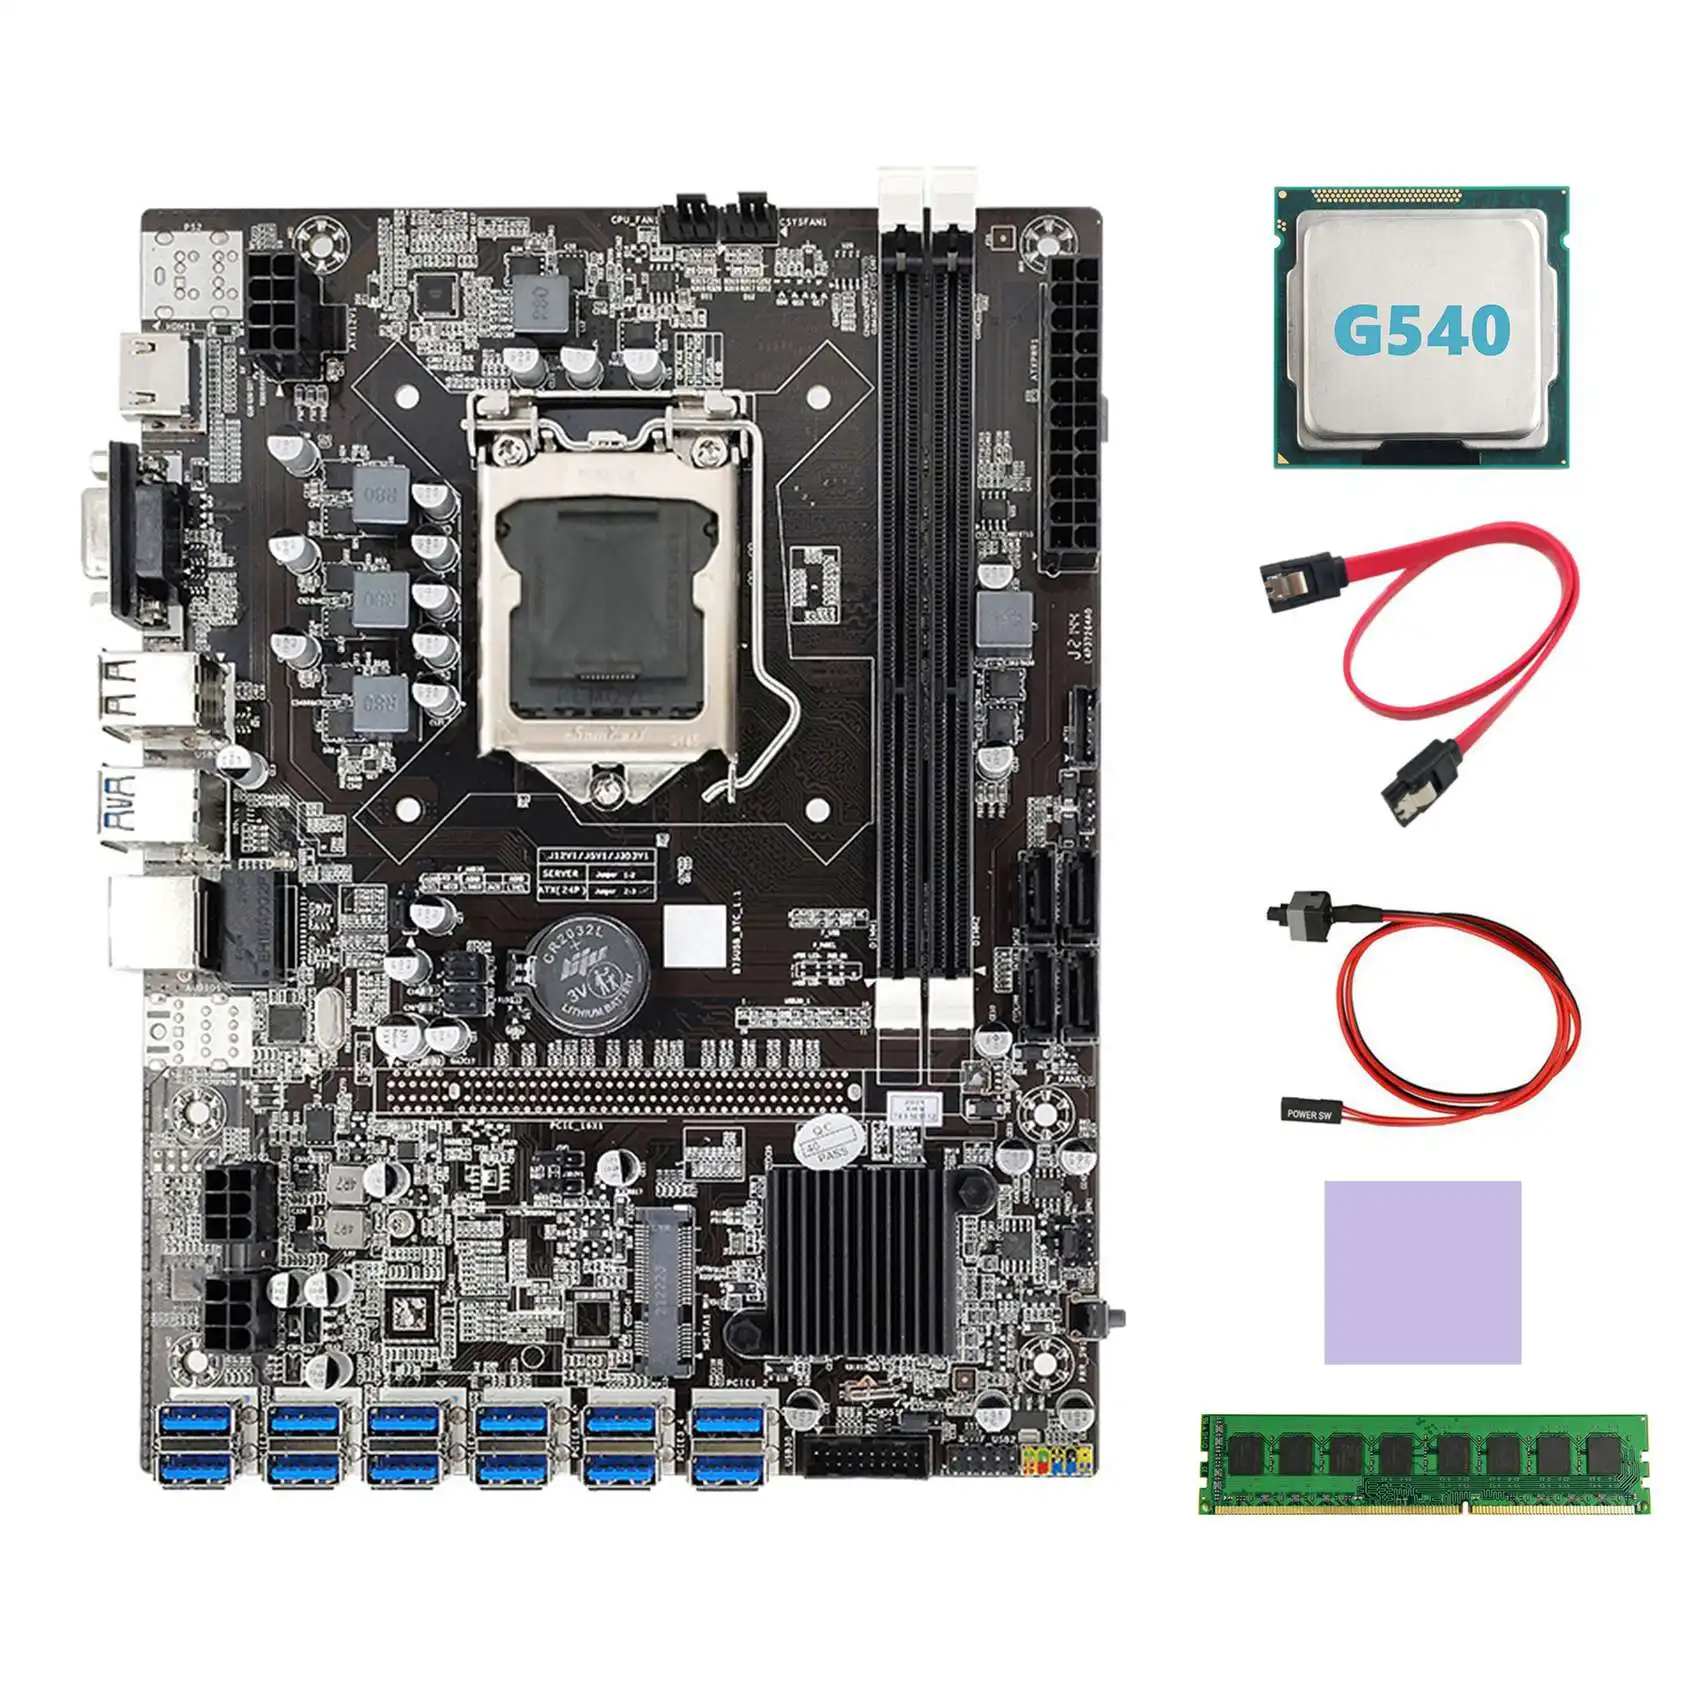 

B75 BTC Mining Motherboard 12XUSB+G540 CPU+DDR3 4GB 1600Mhz RAM+SATA Cable+Switch Cable+Thermal Pad B75 USB Motherboard